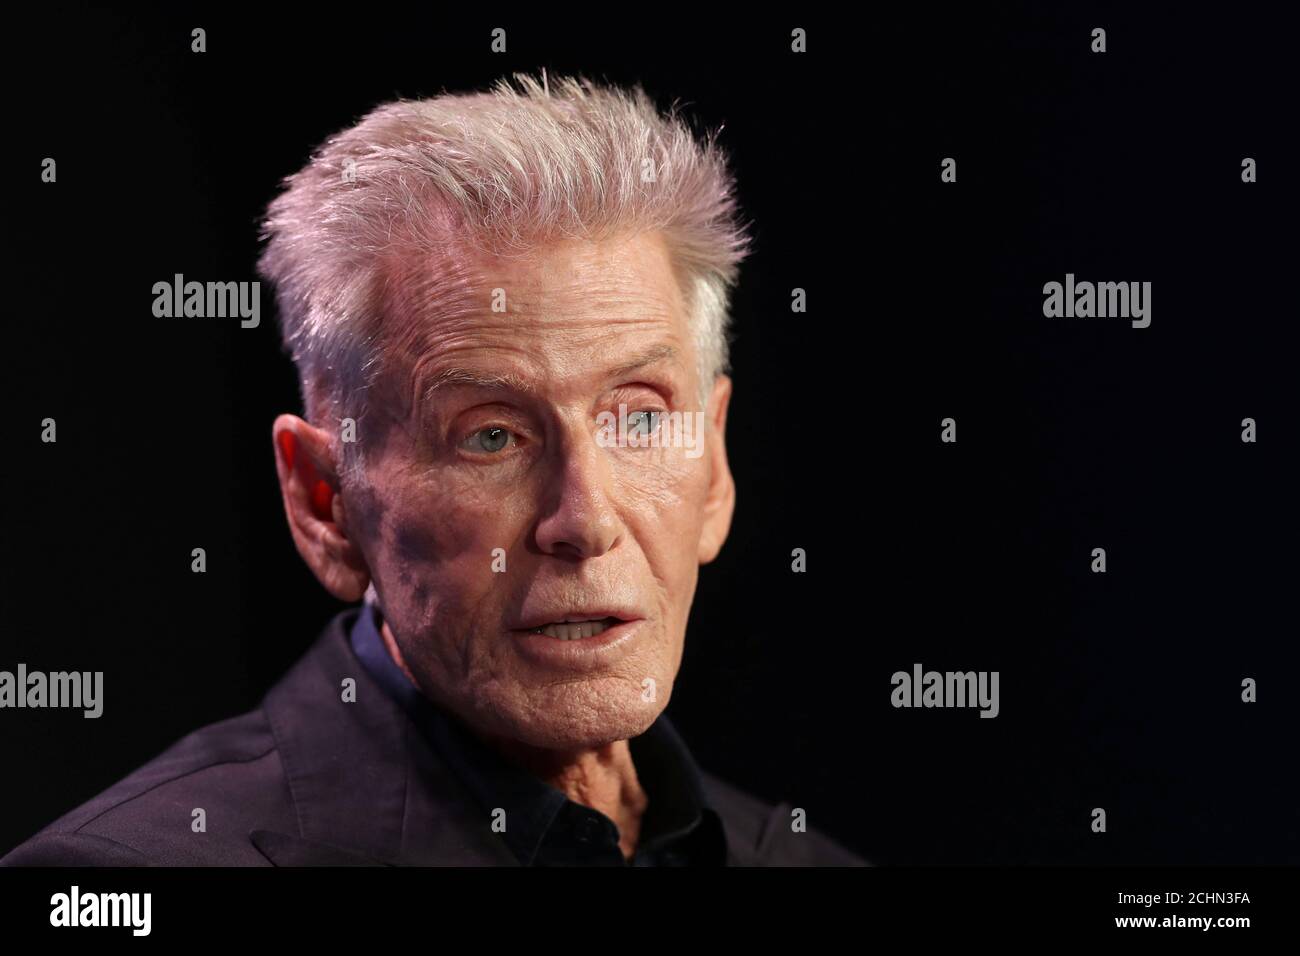 Calvin Klein, Designer and Founder, Calvin Klein Inc., speaks at the 2019  Milken Institute Global Conference in Beverly Hills, California, U.S., May  1, 2019. REUTERS/Lucy Nicholson Stock Photo - Alamy